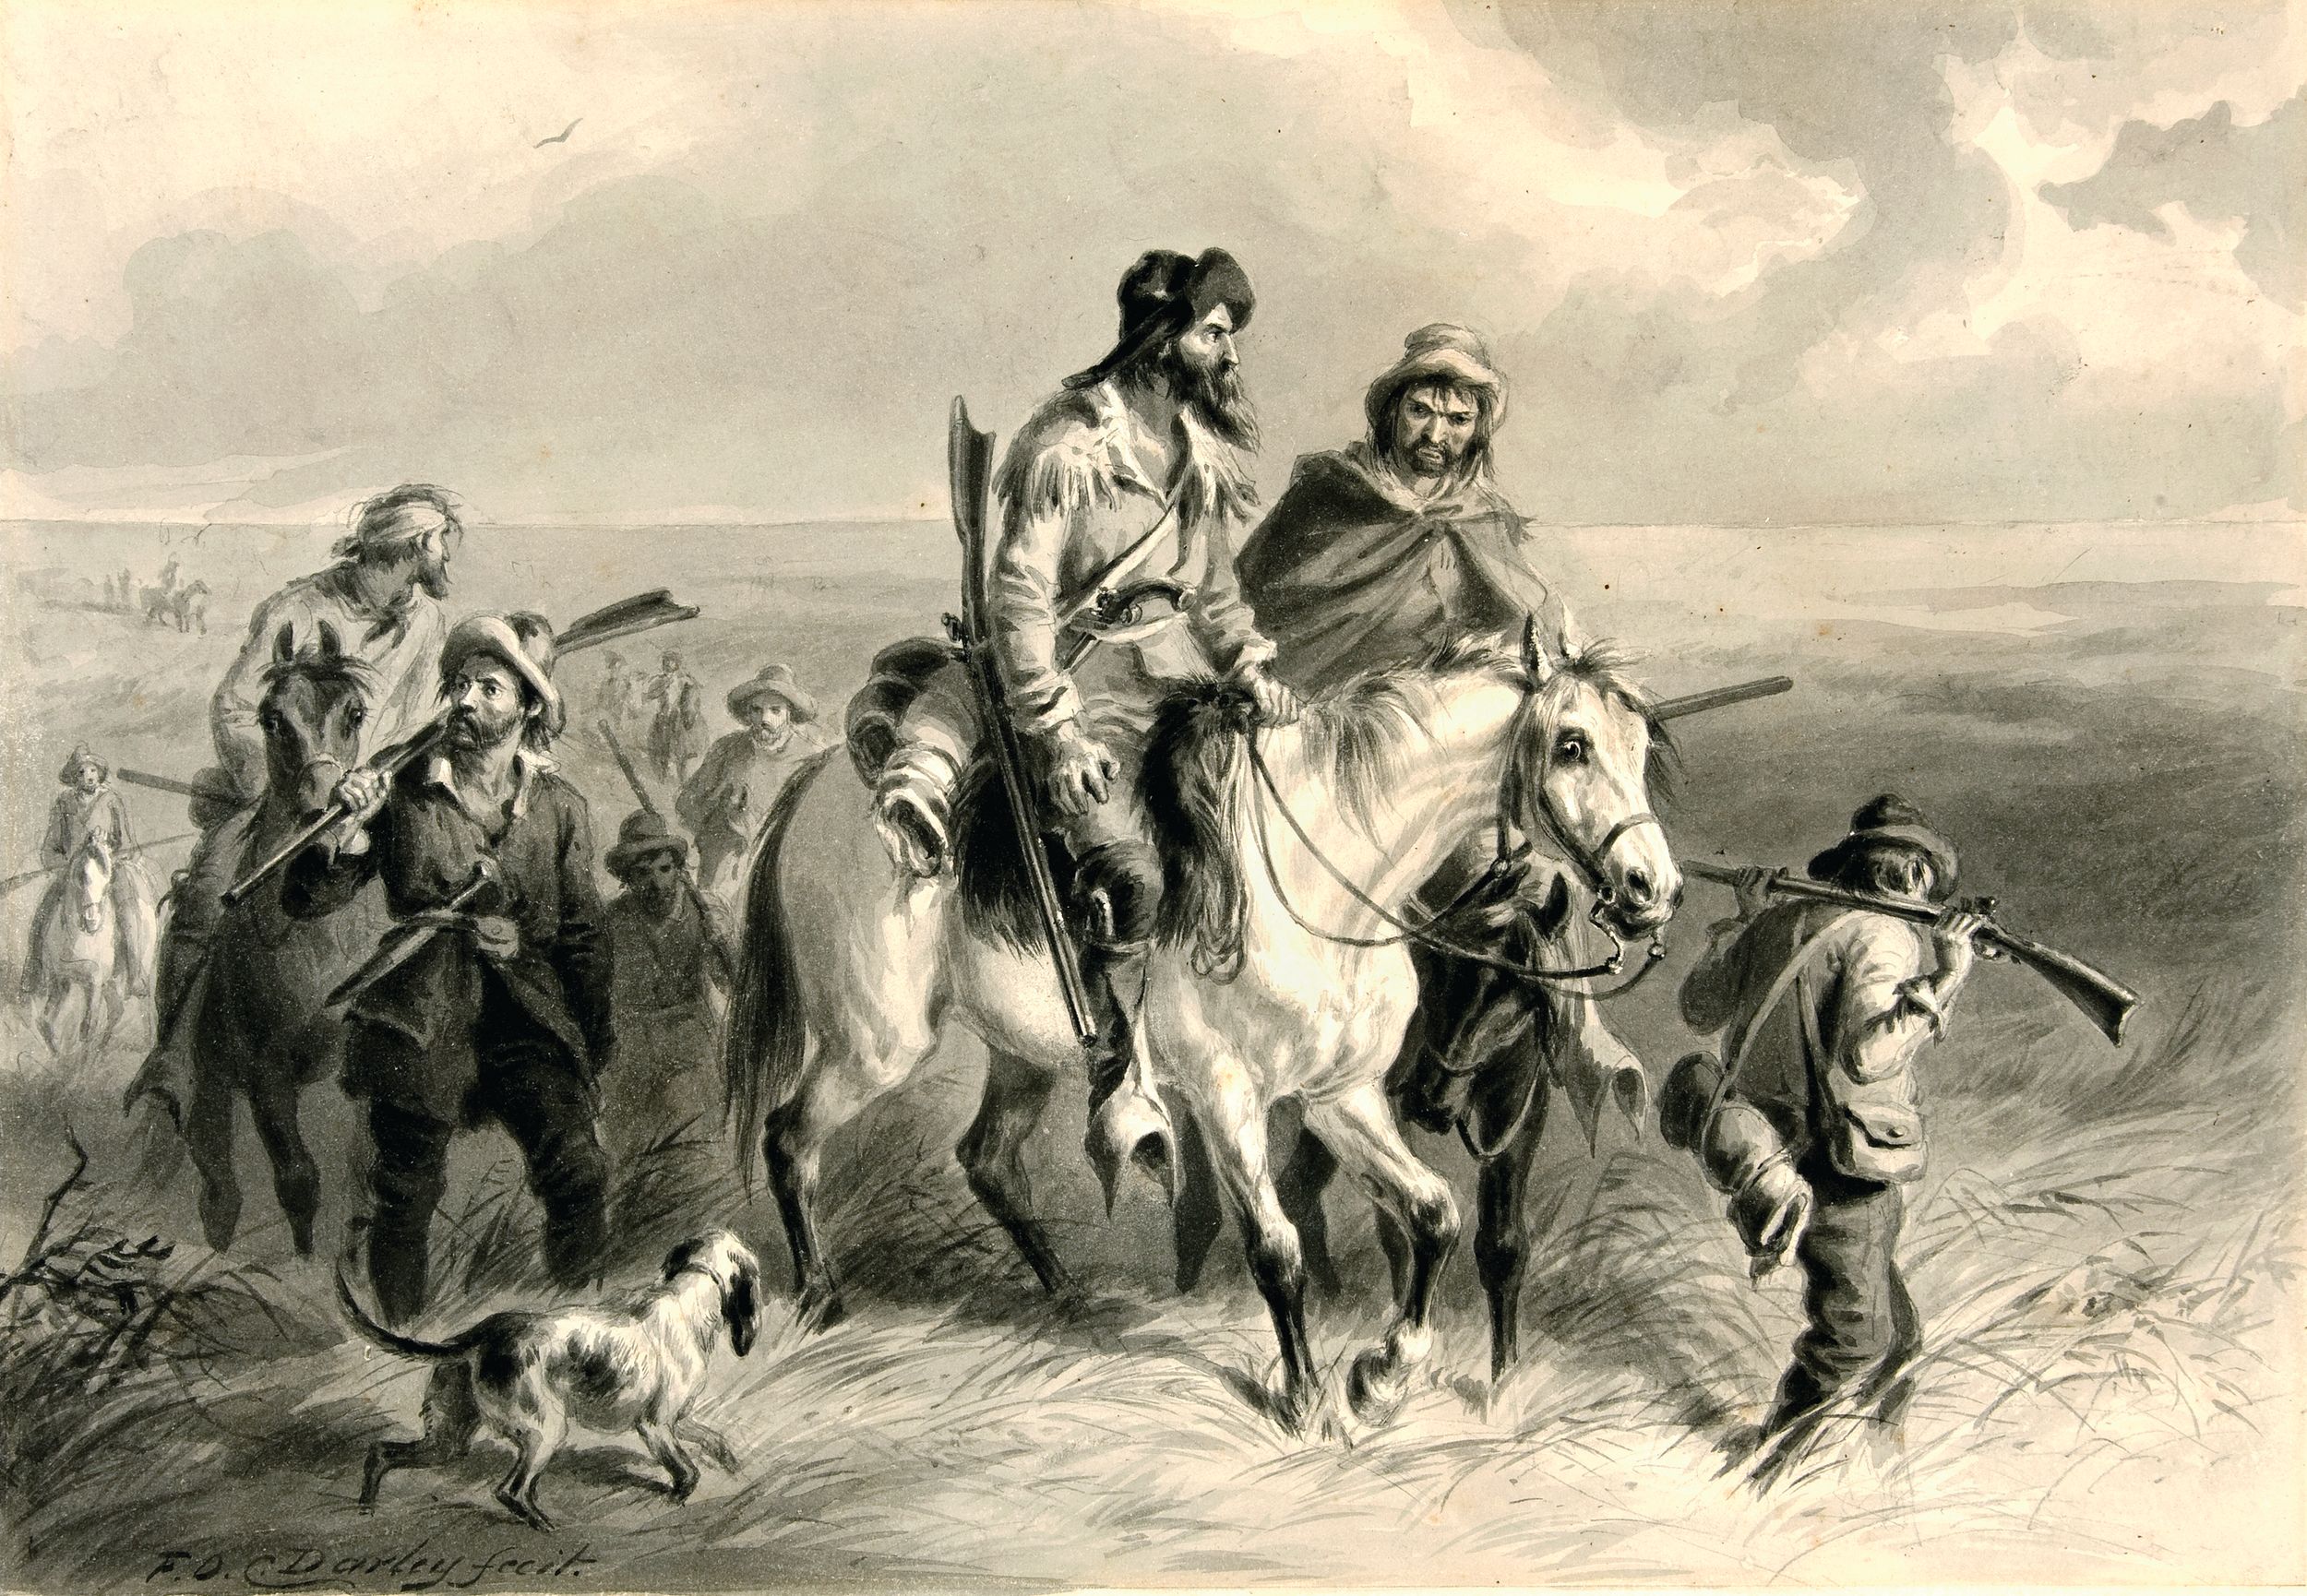 “Border Ruffians Invading Kansas,” pen, ink and wash drawing by Felix O. C. Darley (American, 1822–1888).  “Border Ruffians” were pro-slavery activists from Missouri who crossed into Kansas Territory between 1854 and 1860 to promote slavery. 